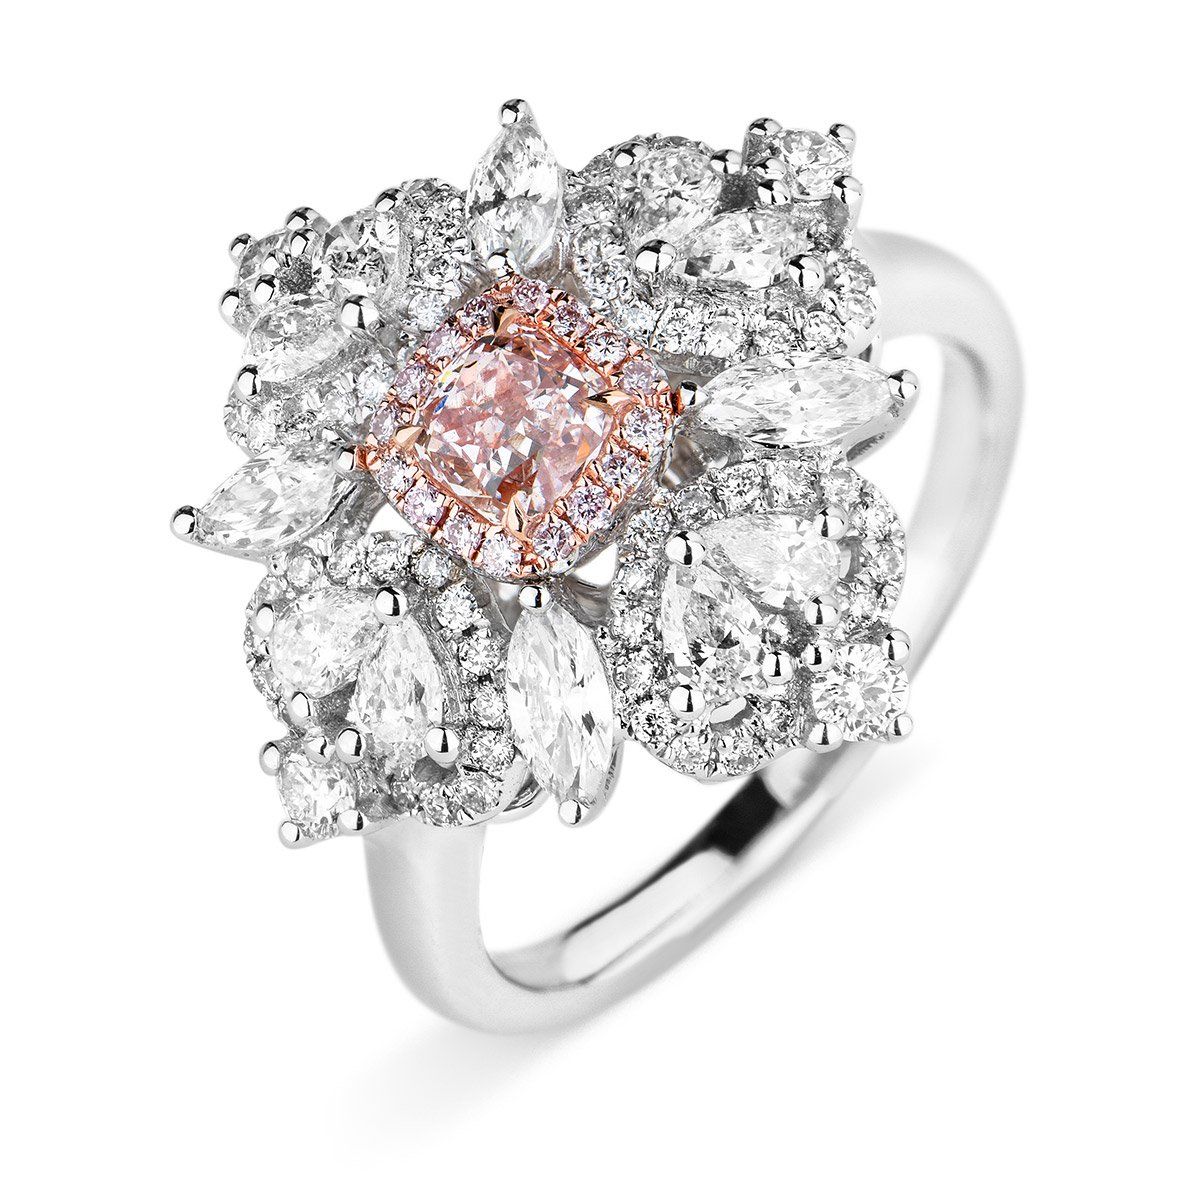 Light Pink Diamond Ring, 0.36 Ct. (1.58 Ct. TW), Radiant shape, GIA Certified, 1203460160